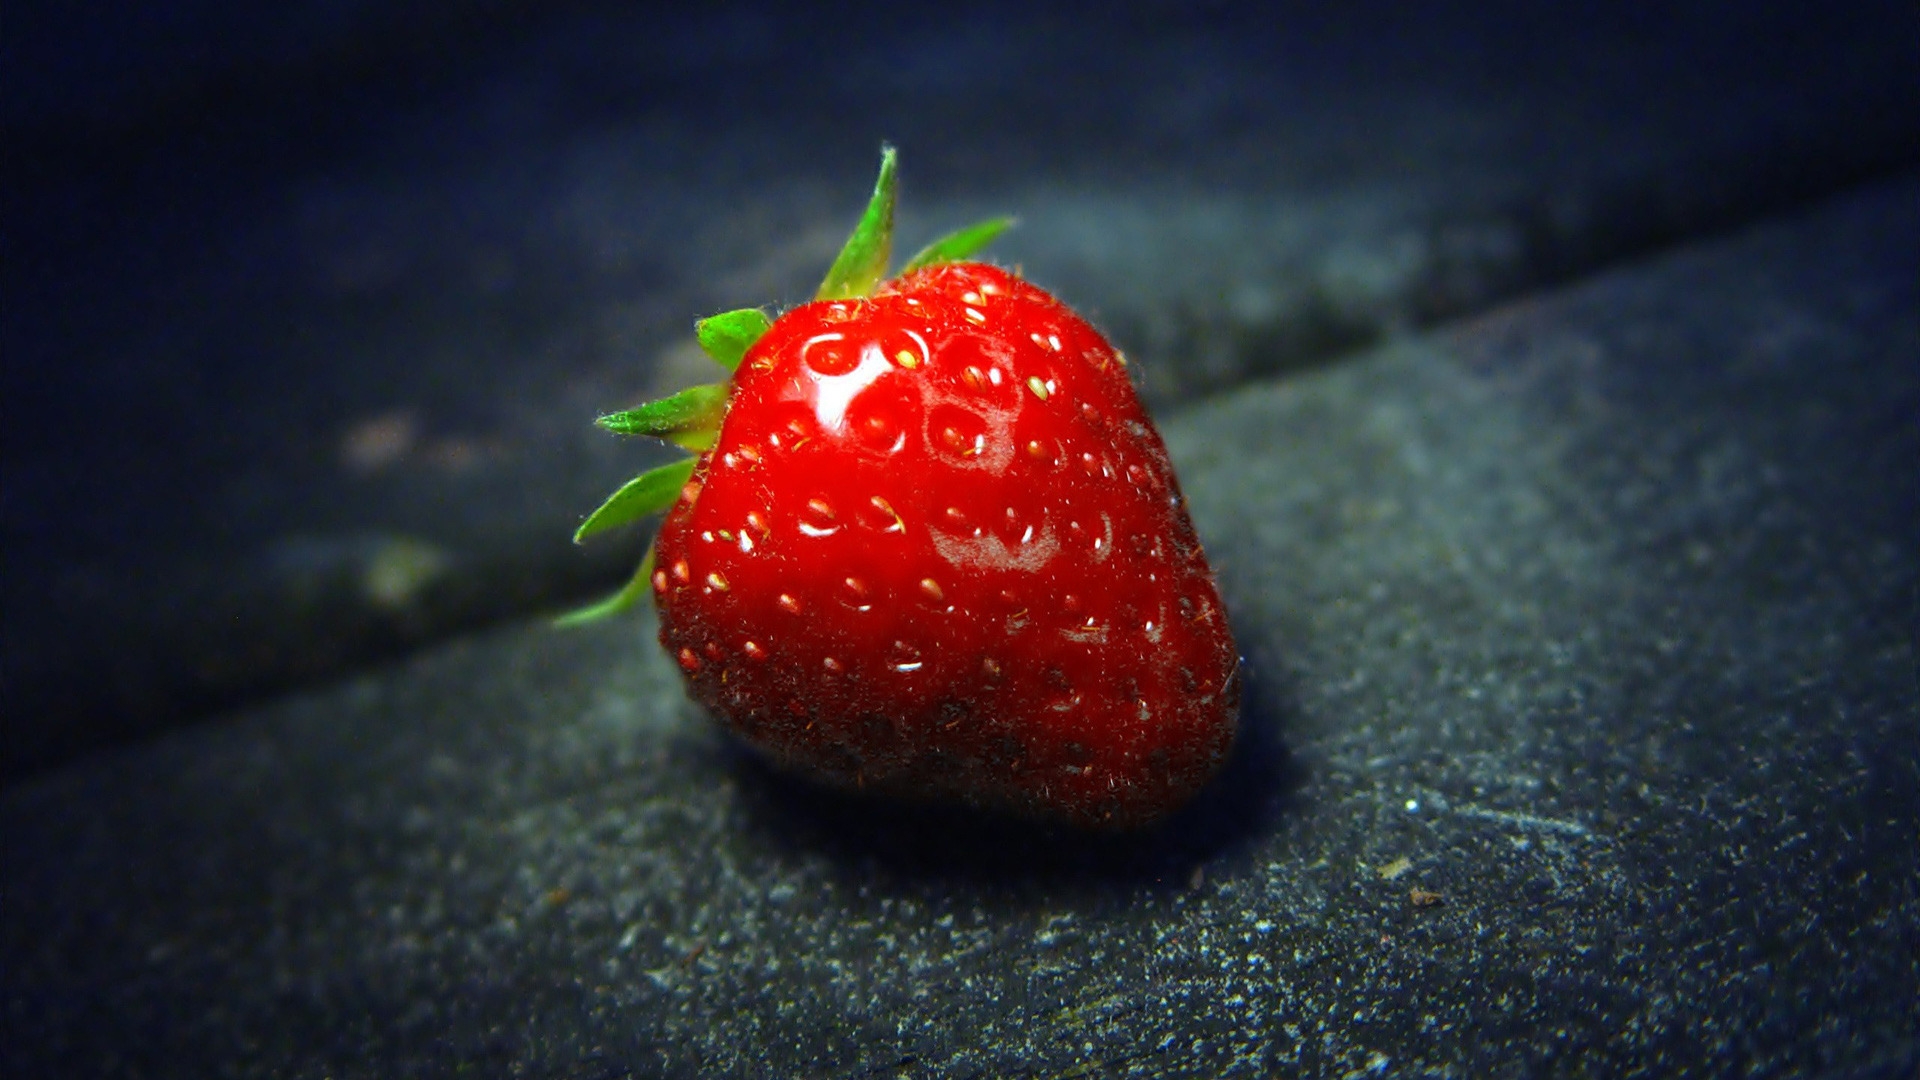 The Strawberry for 1920 x 1080 HDTV 1080p resolution